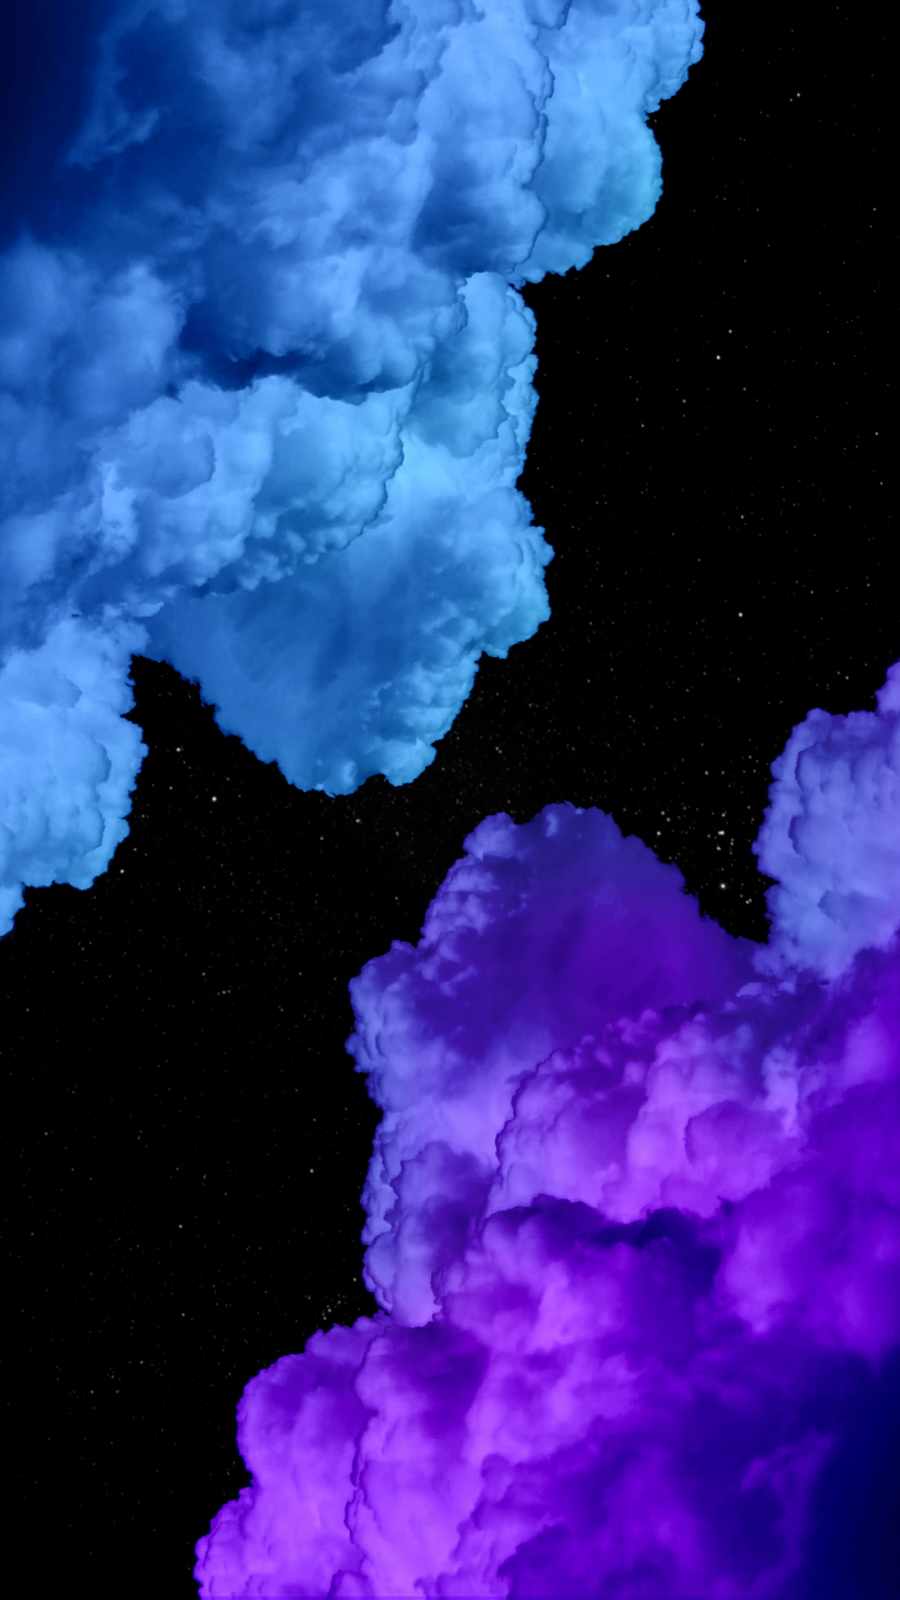 A purple and blue cloud with stars in the background - Smoke